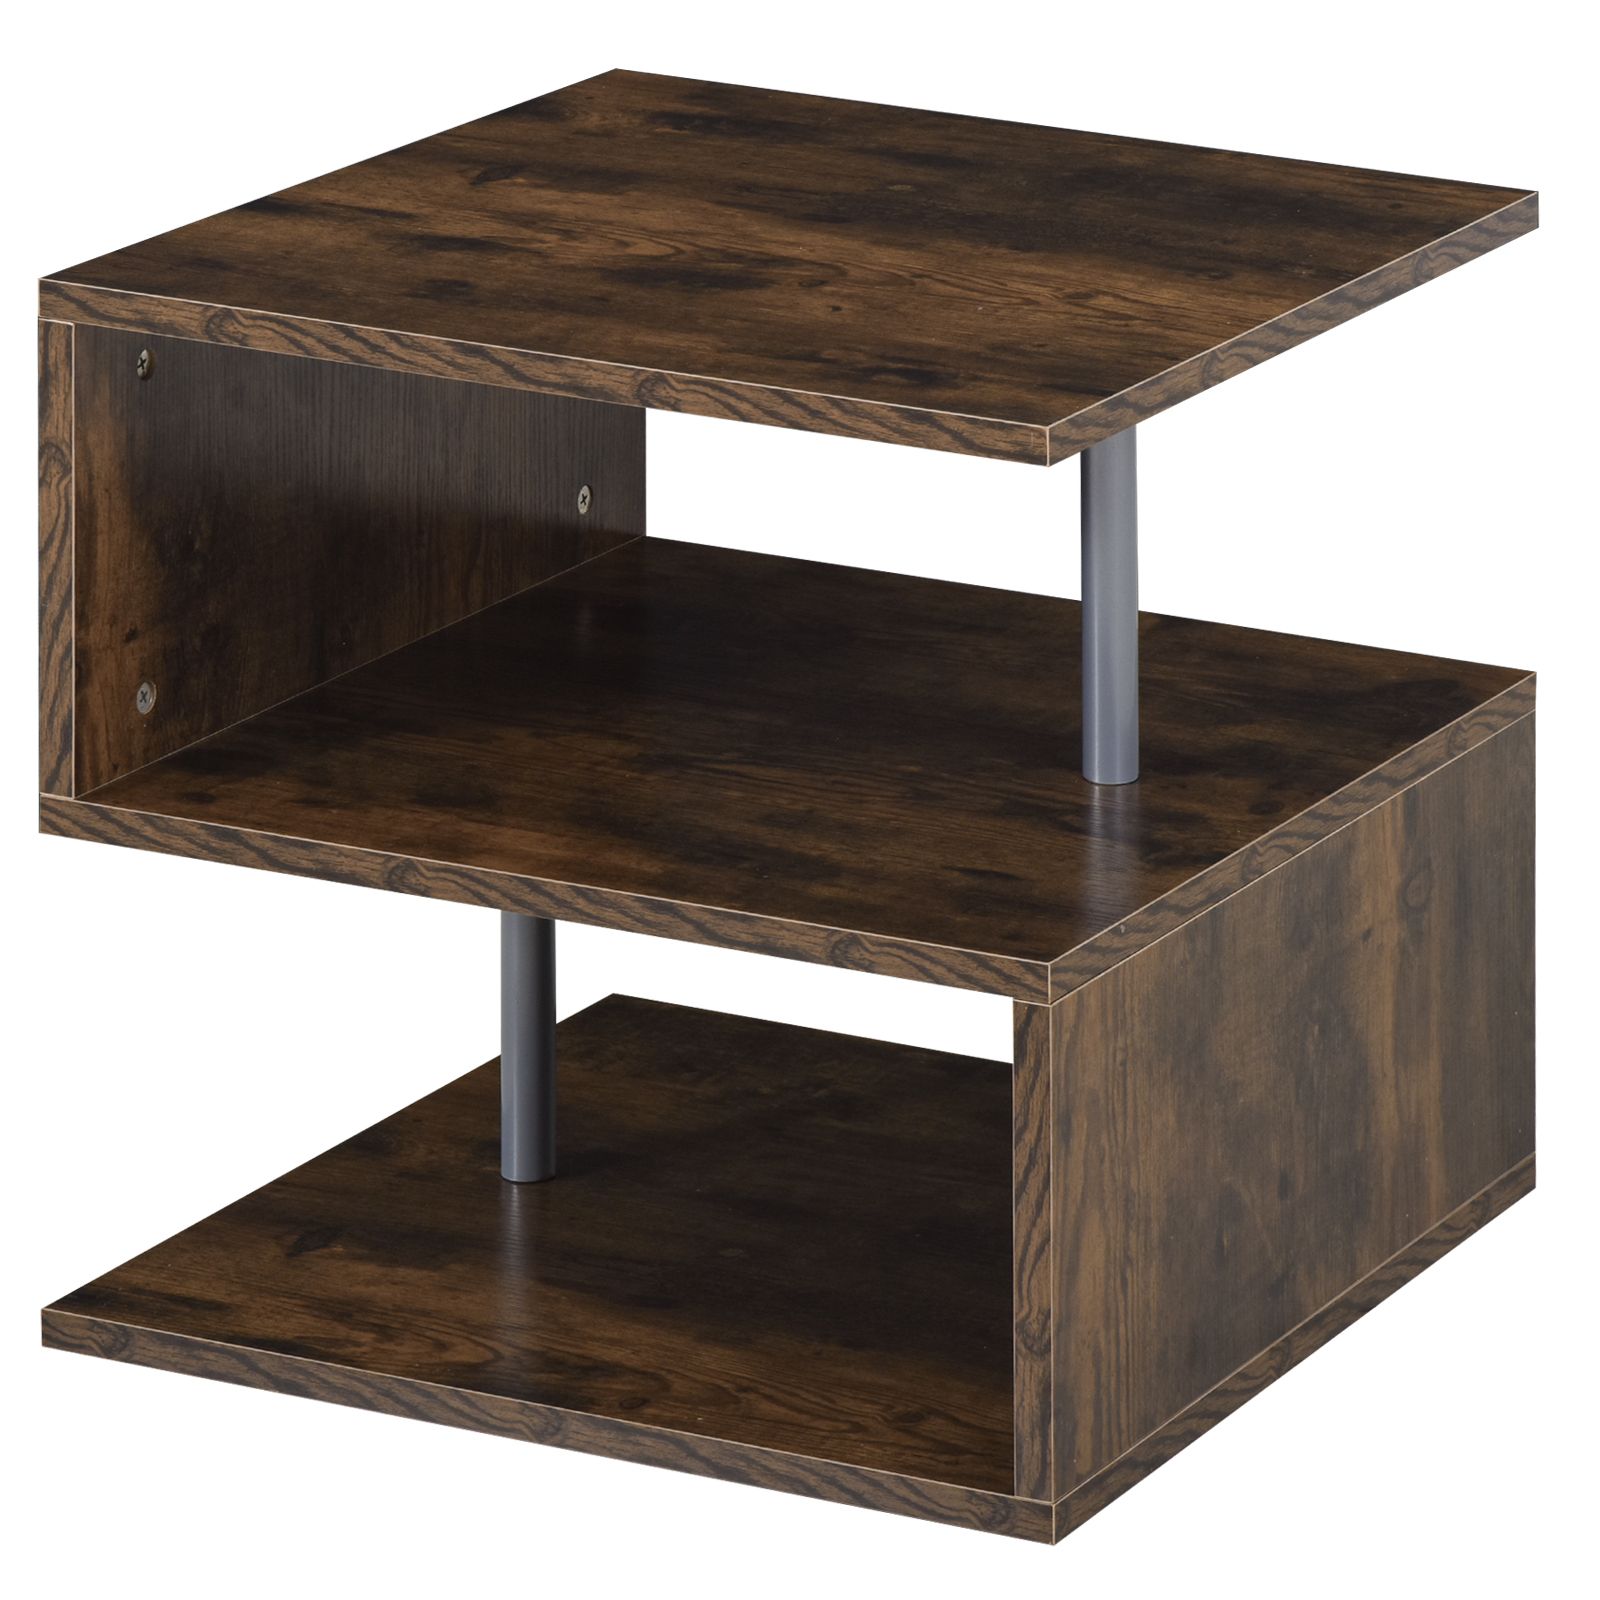 Homcom Coffee End Table S Shape 2 Tier Storage Shelves Organizer For Wood Coffee Tables With 2 Tier Storage (Gallery 11 of 20)